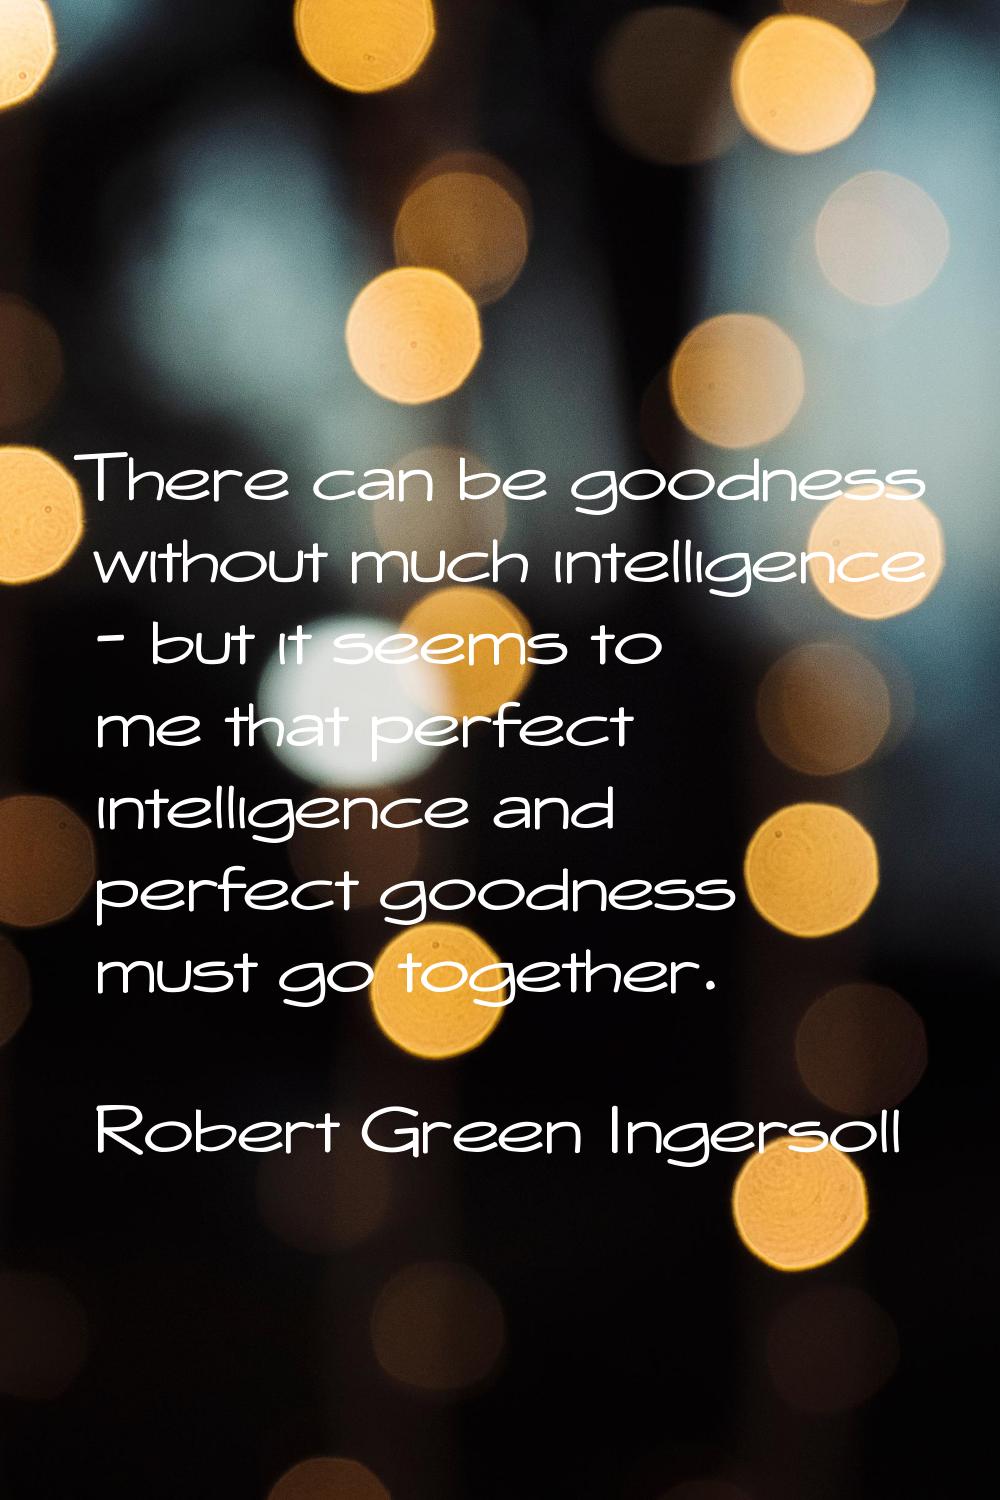 There can be goodness without much intelligence - but it seems to me that perfect intelligence and 